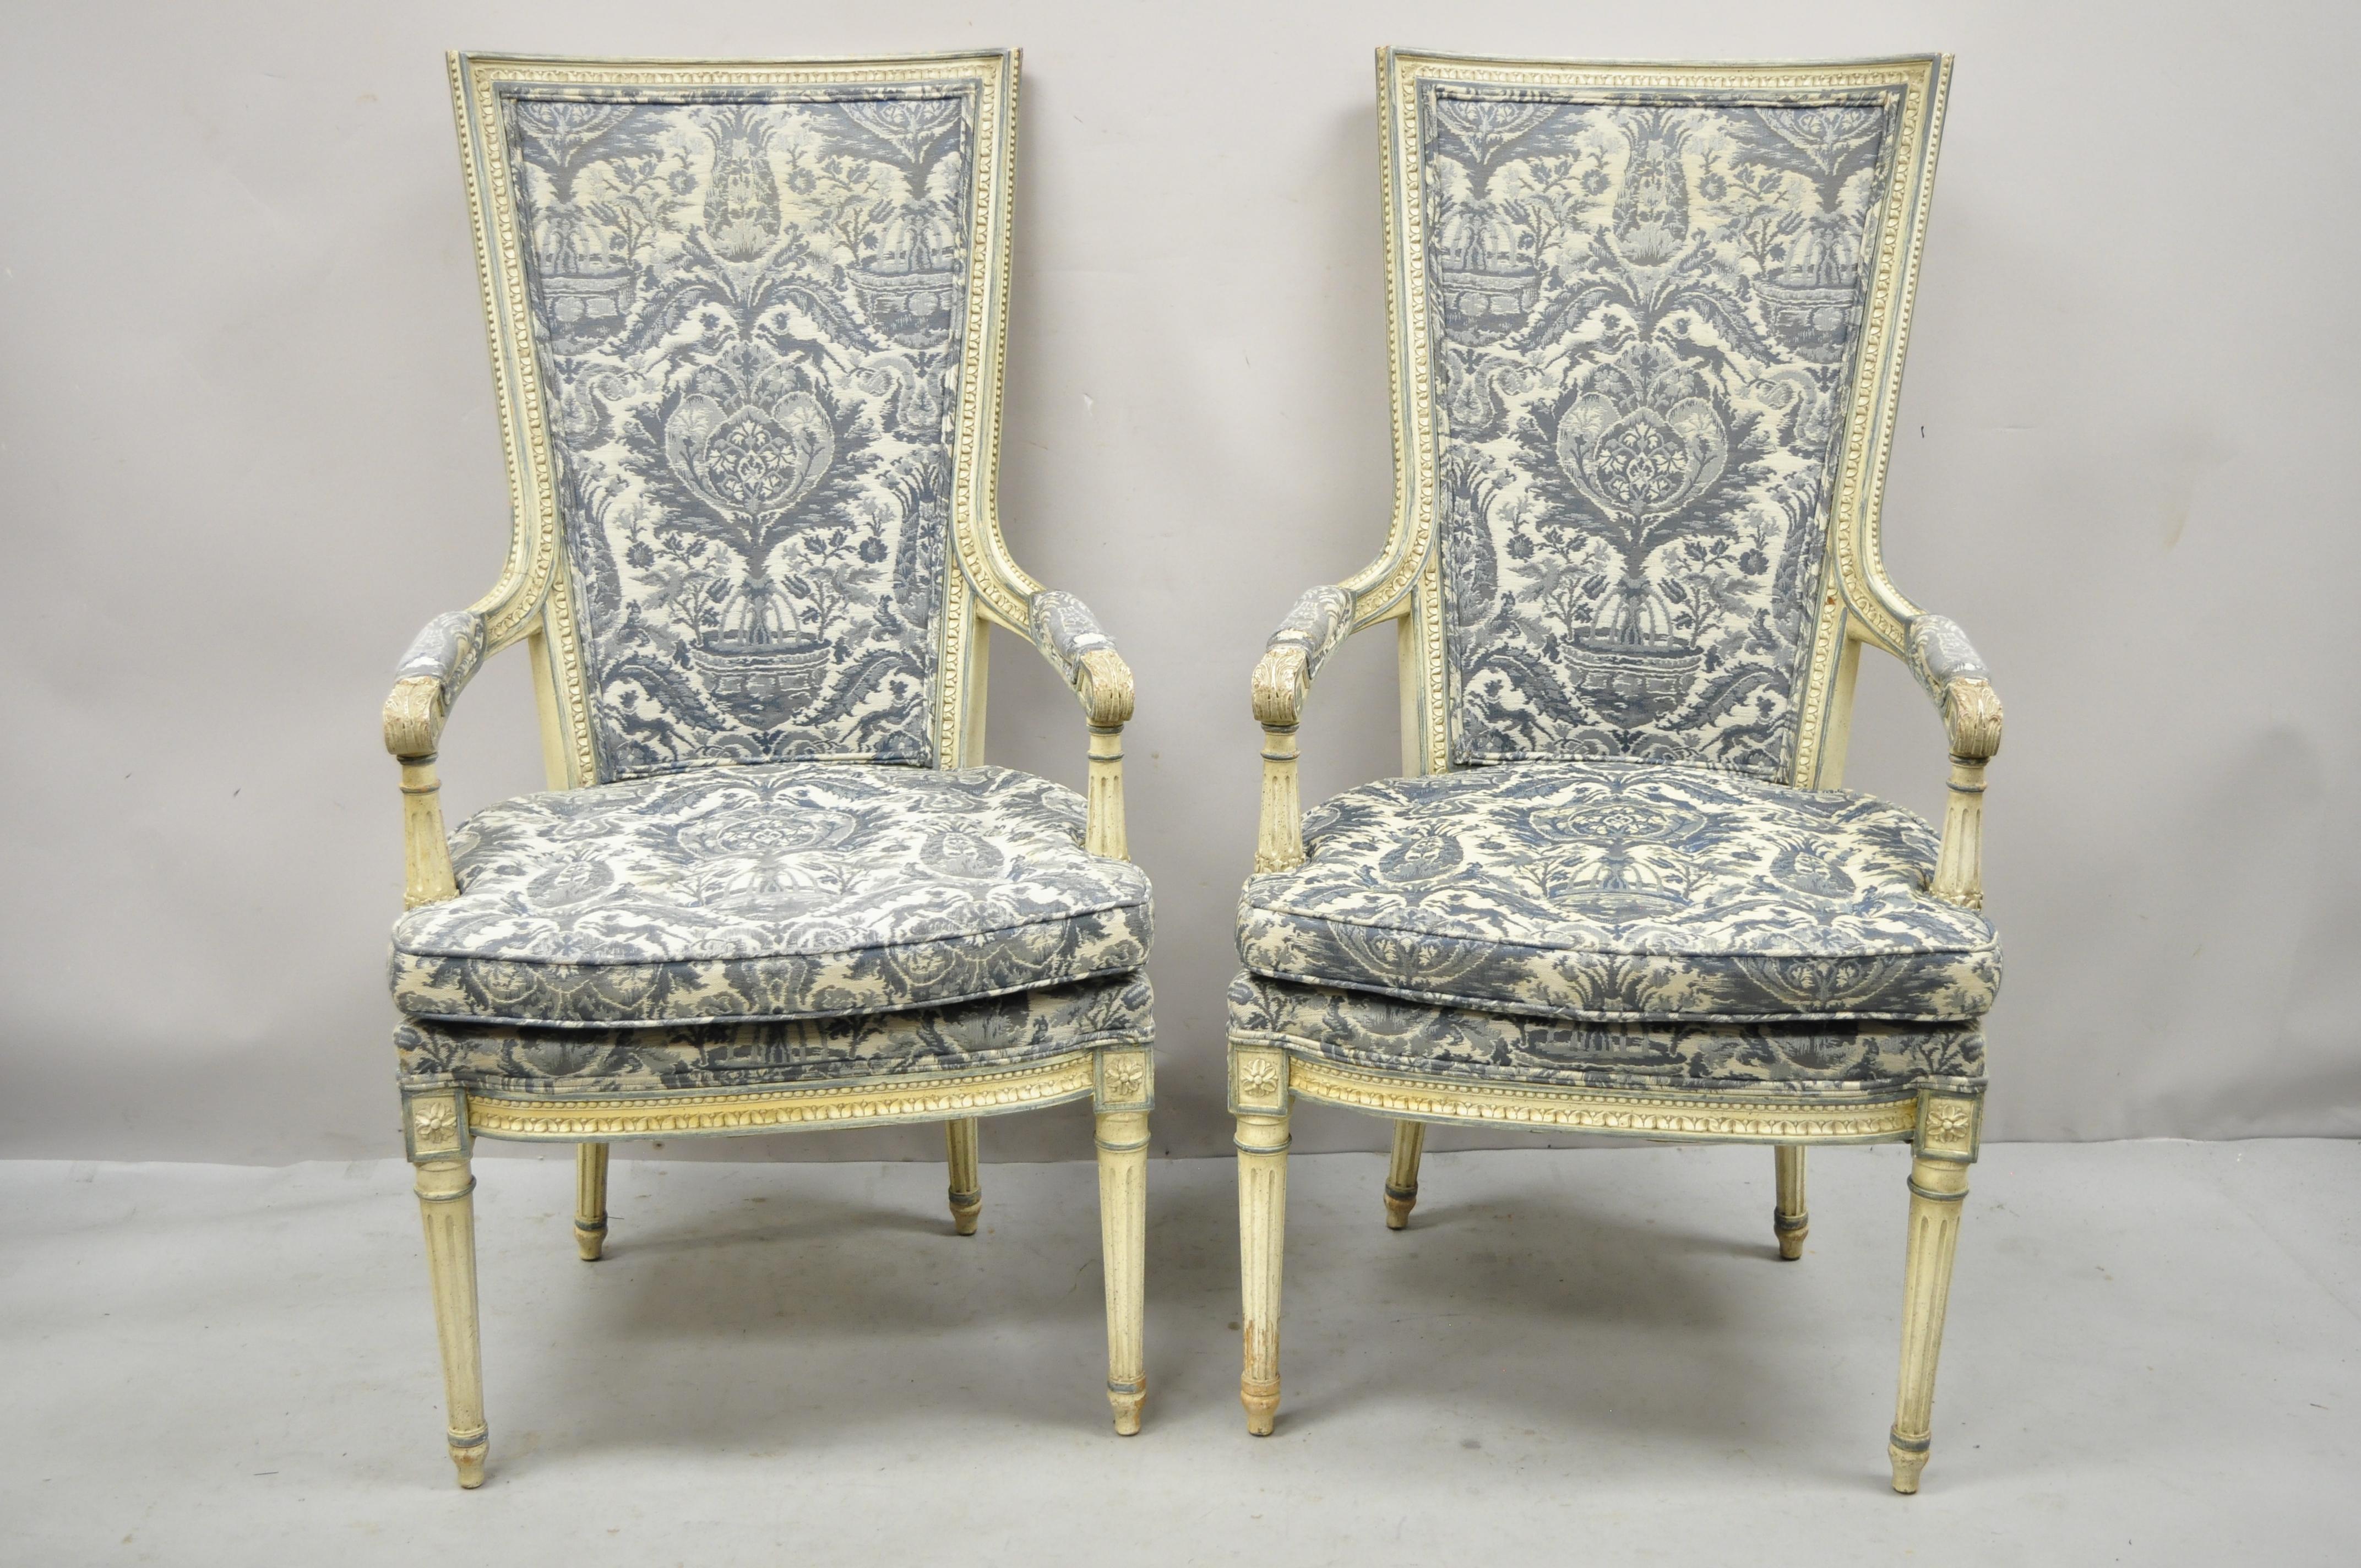 Vintage French Louis XVI Provincial Style Blue & Cream High Back Lounge Arm Chairs - a Pair. Item features blue and cream distress painted frames, blue upholstery, tall square backs, solid wood frames, upholstered armrests, tapered legs, very nice